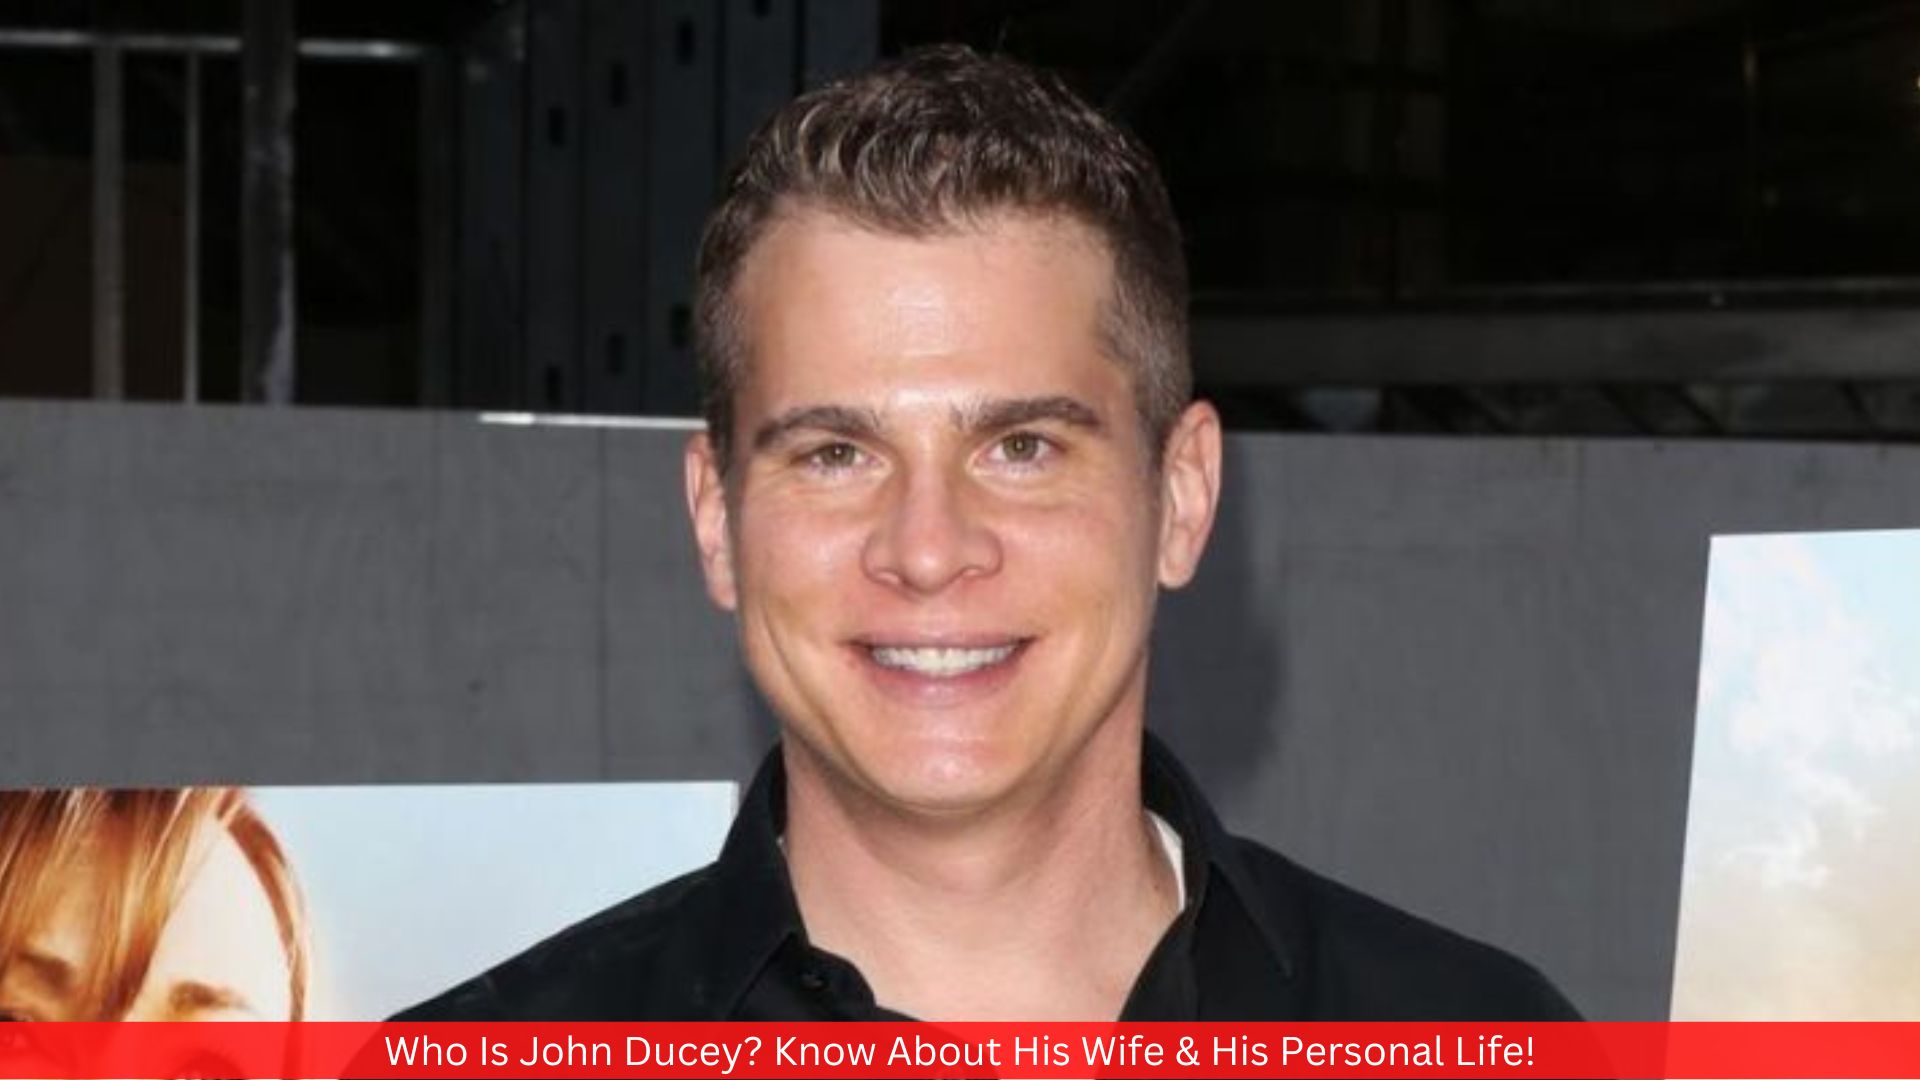 Who Is John Ducey? Know About His Wife & His Personal Life!